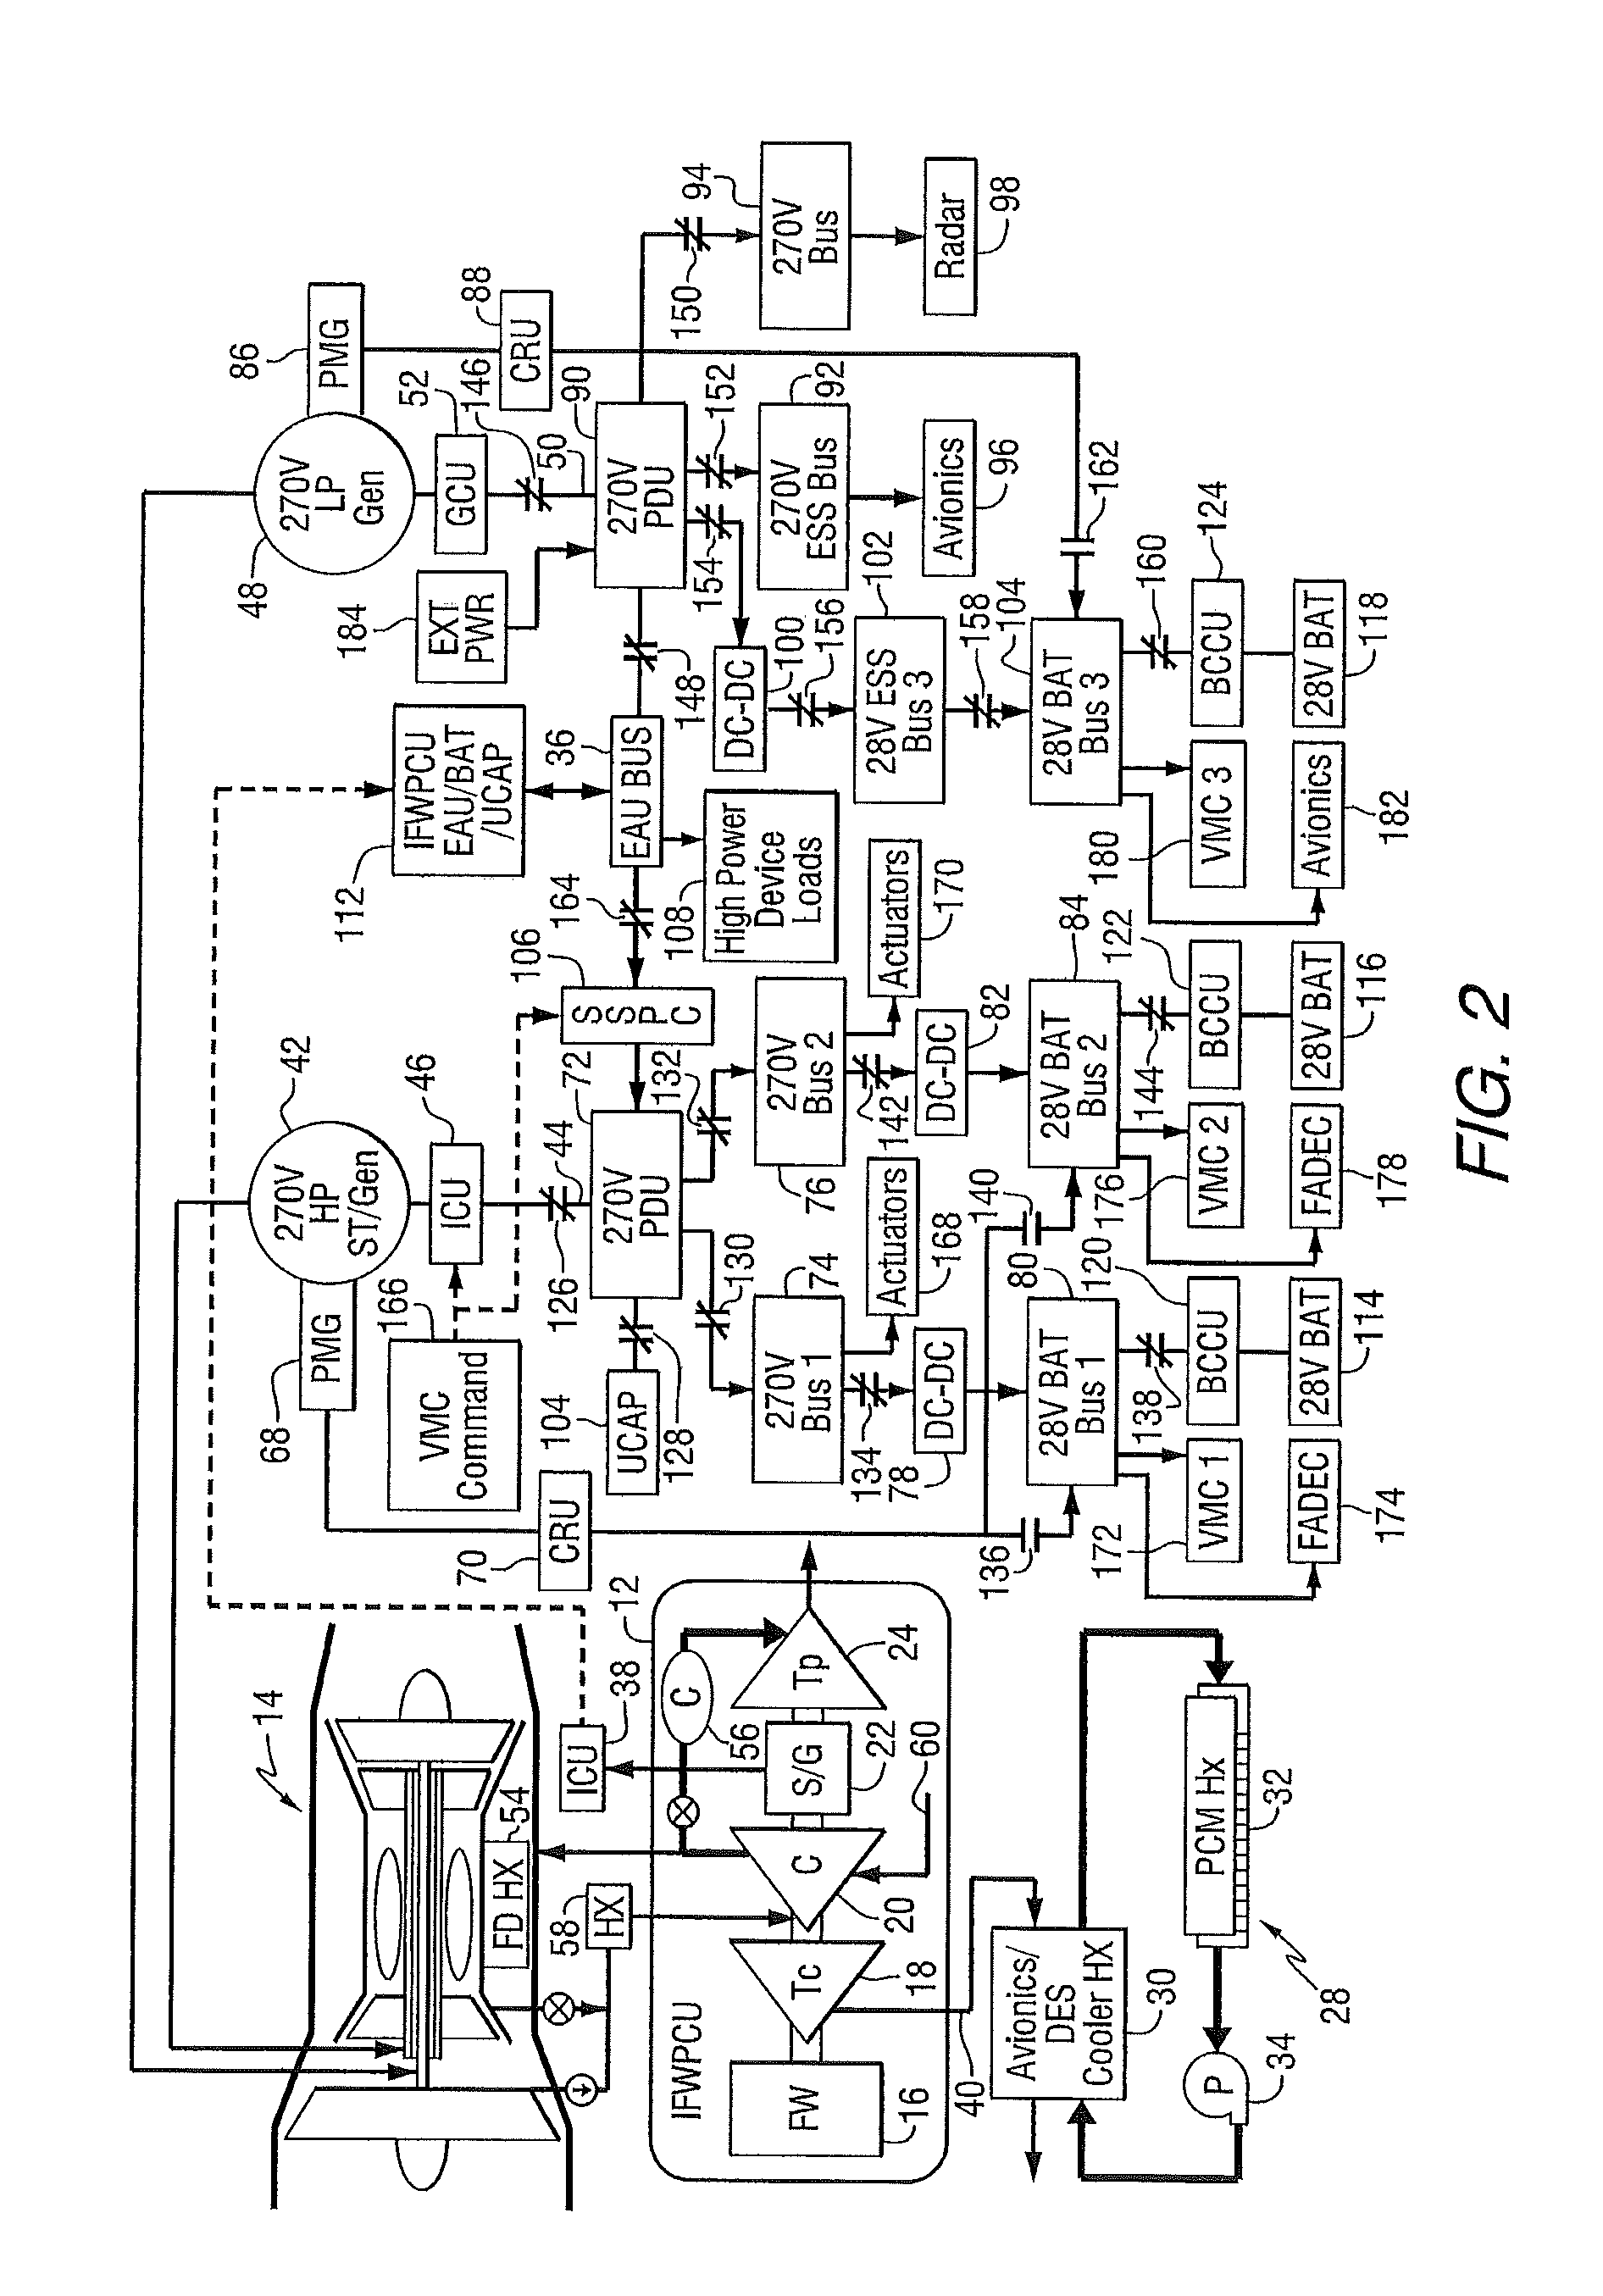 Apparatus for aircraft with high peak power equipment